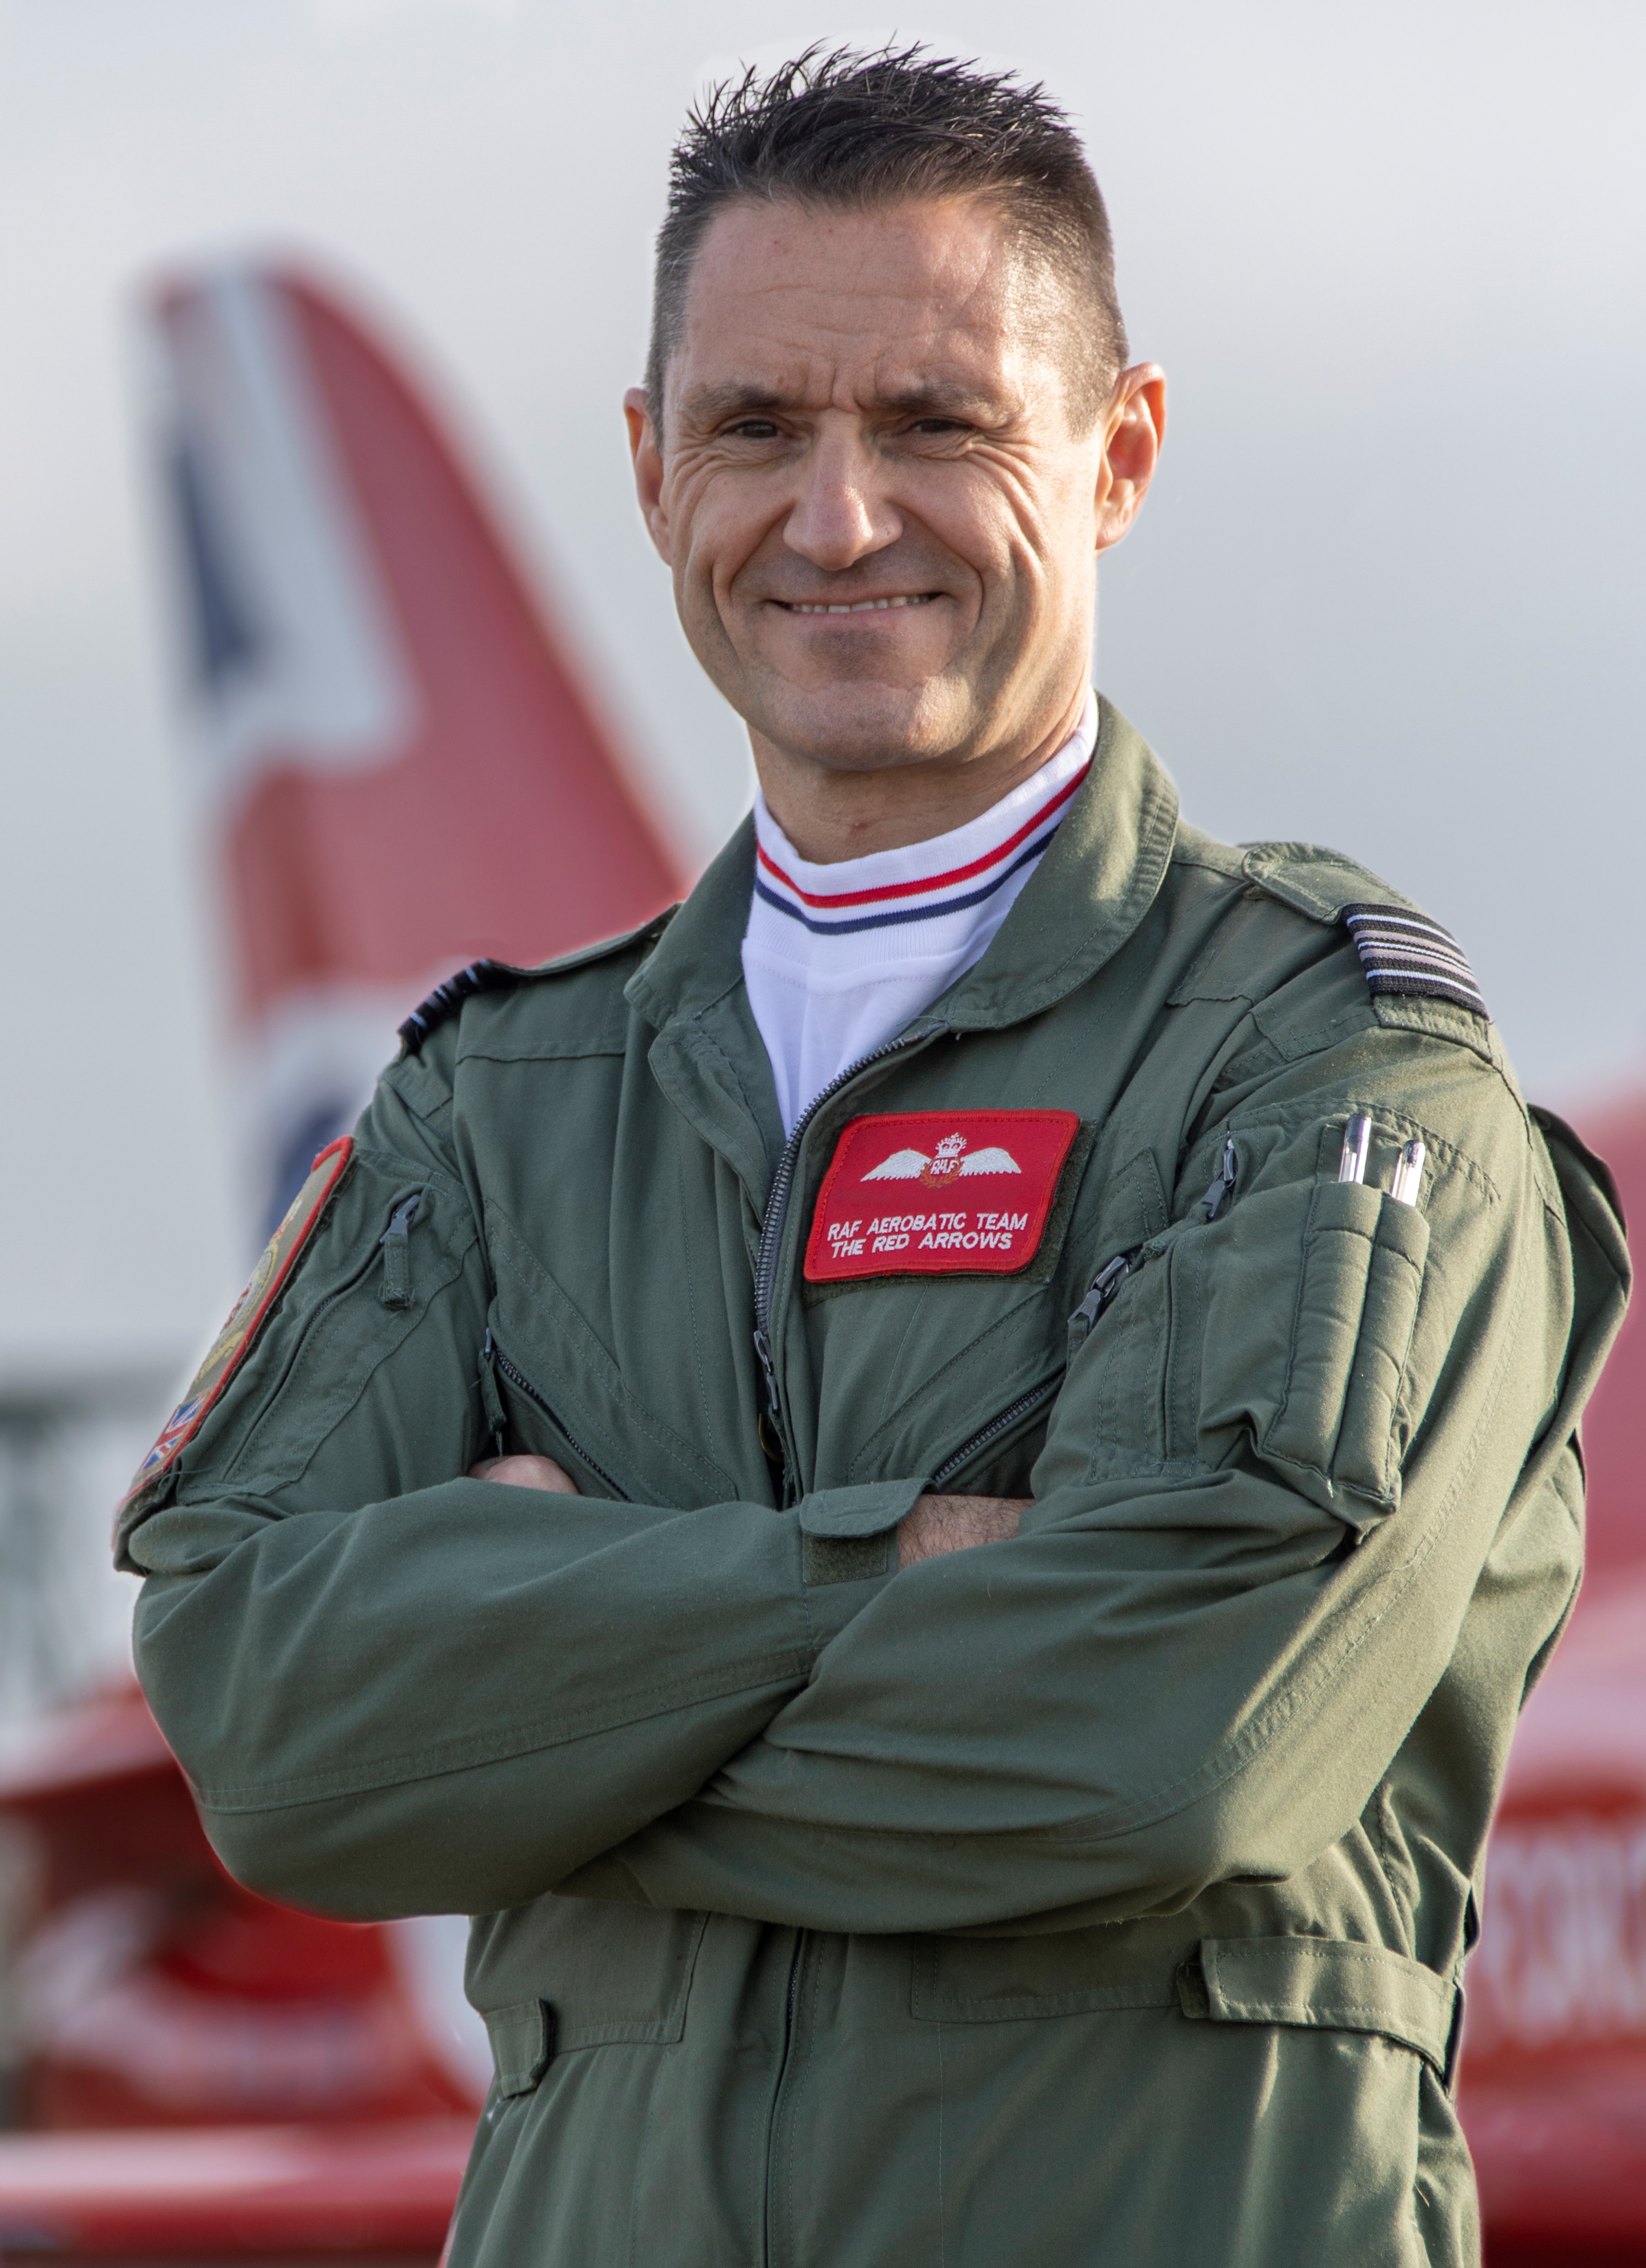 Squadron Leader Graeme Muscat will become Red 10 in around March.